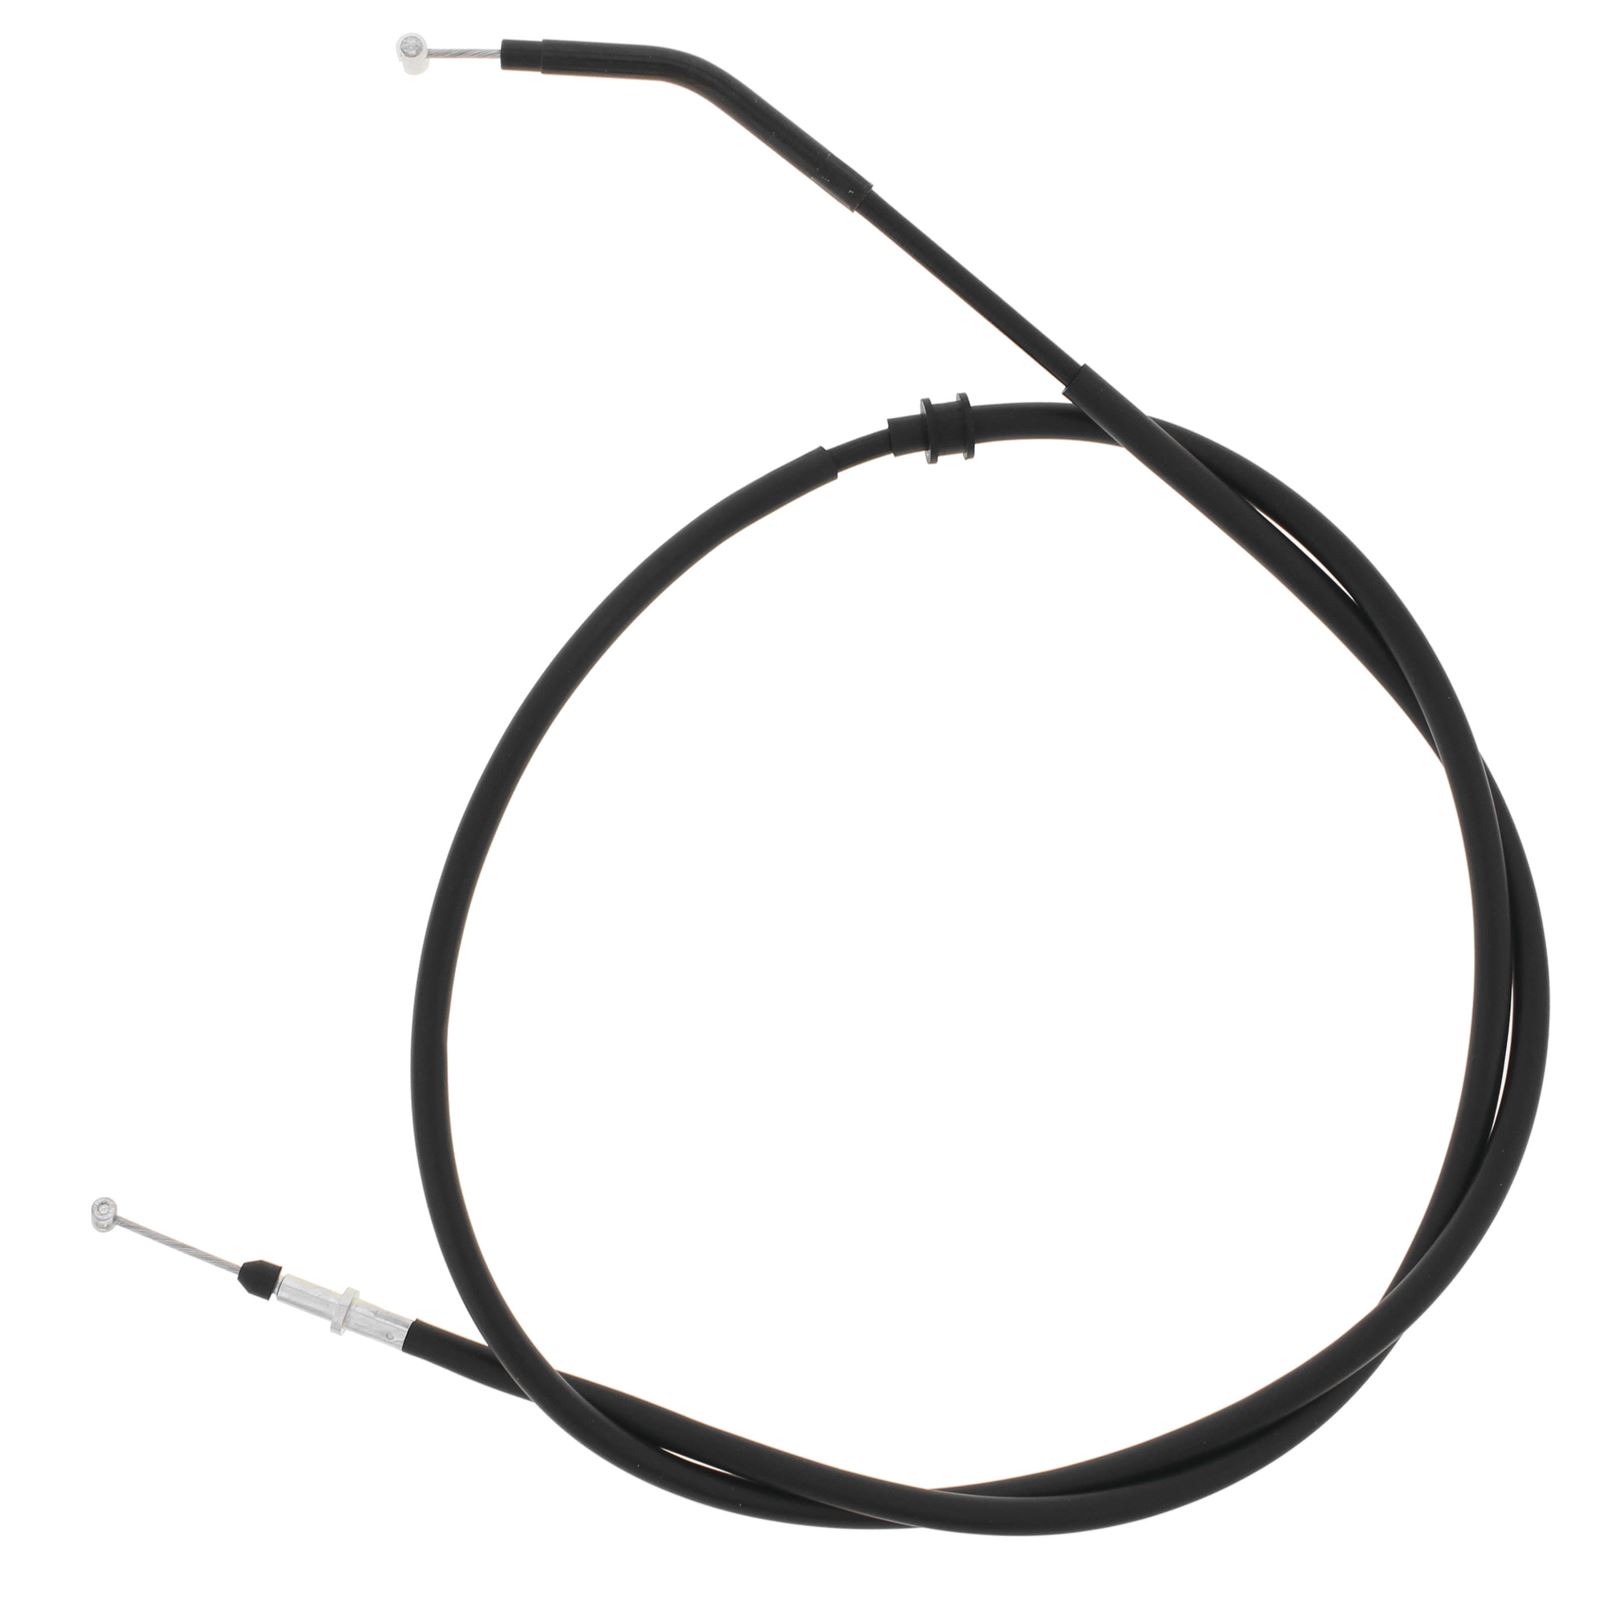 Brake Cable Rear for Suzuki Motorcycles